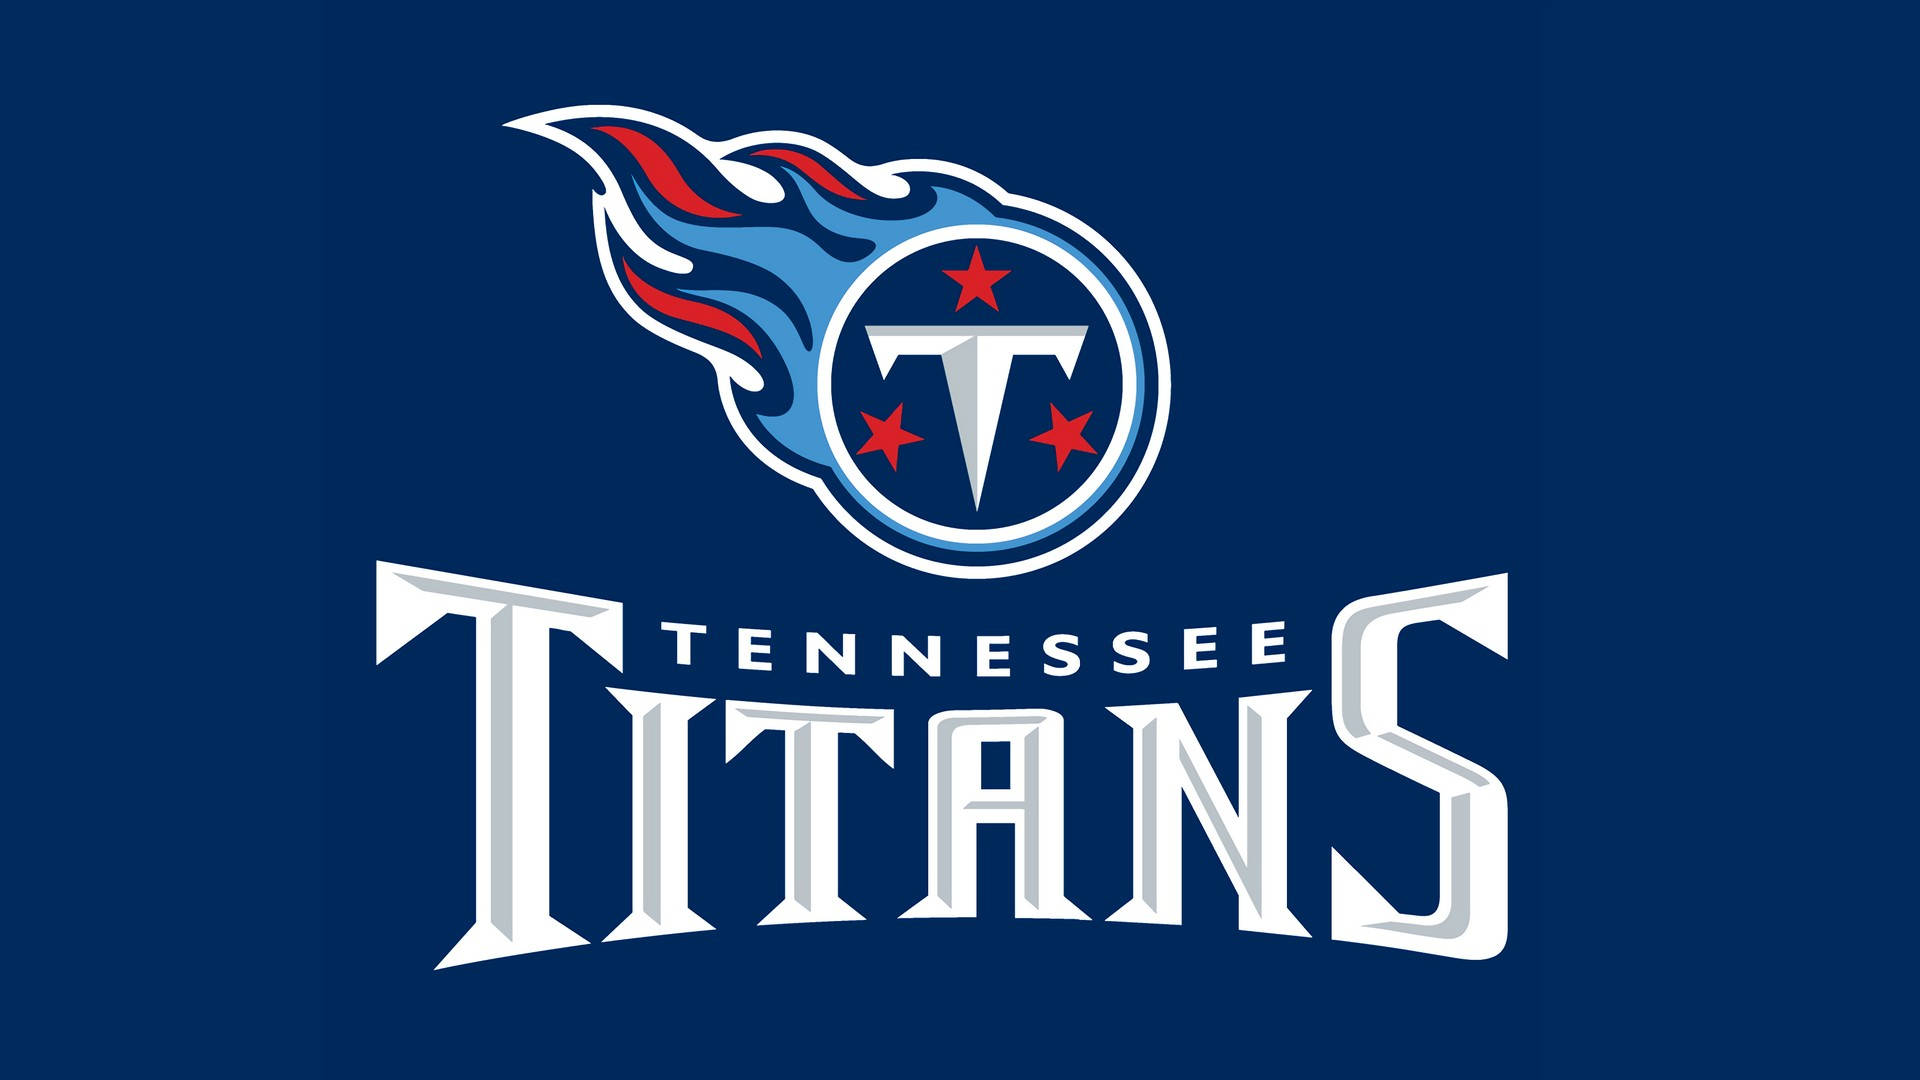 Tennessee Titans Background Wallpaper